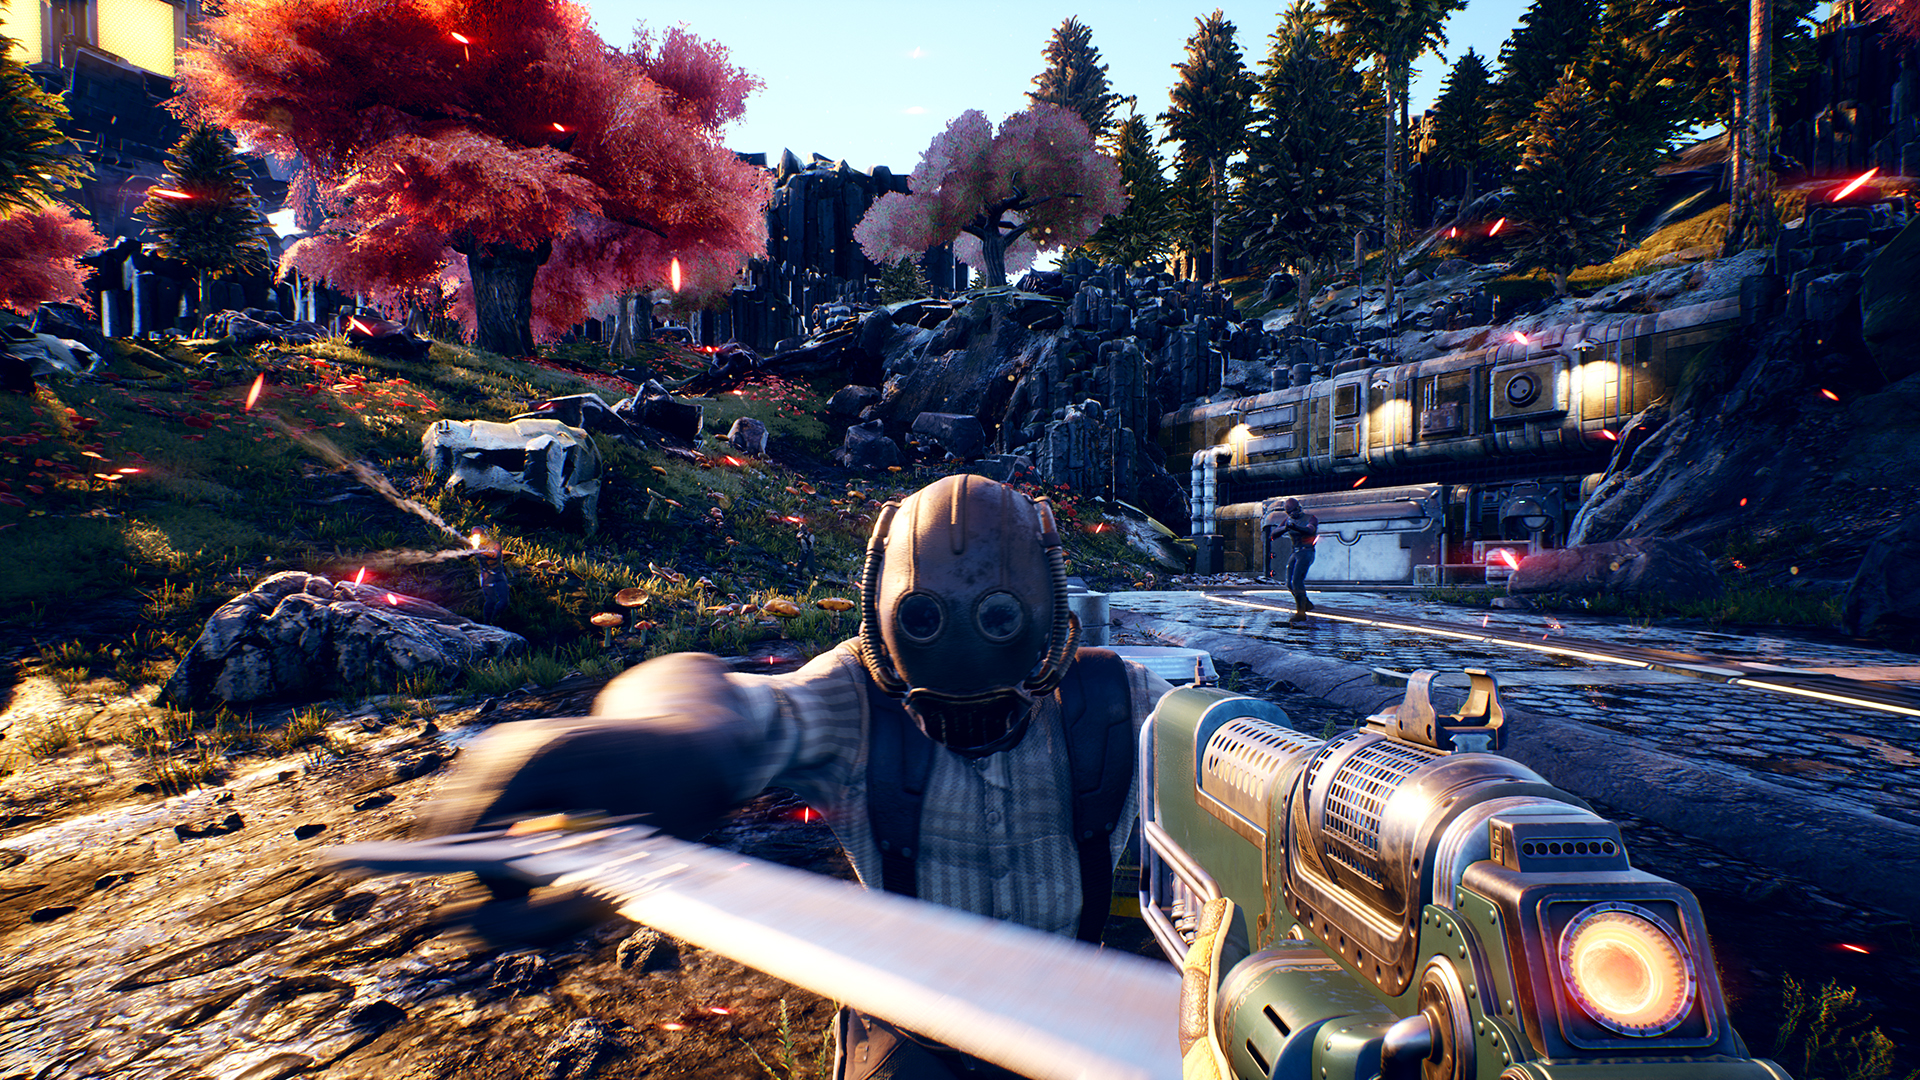 Save 67% on The Outer Worlds on Steam